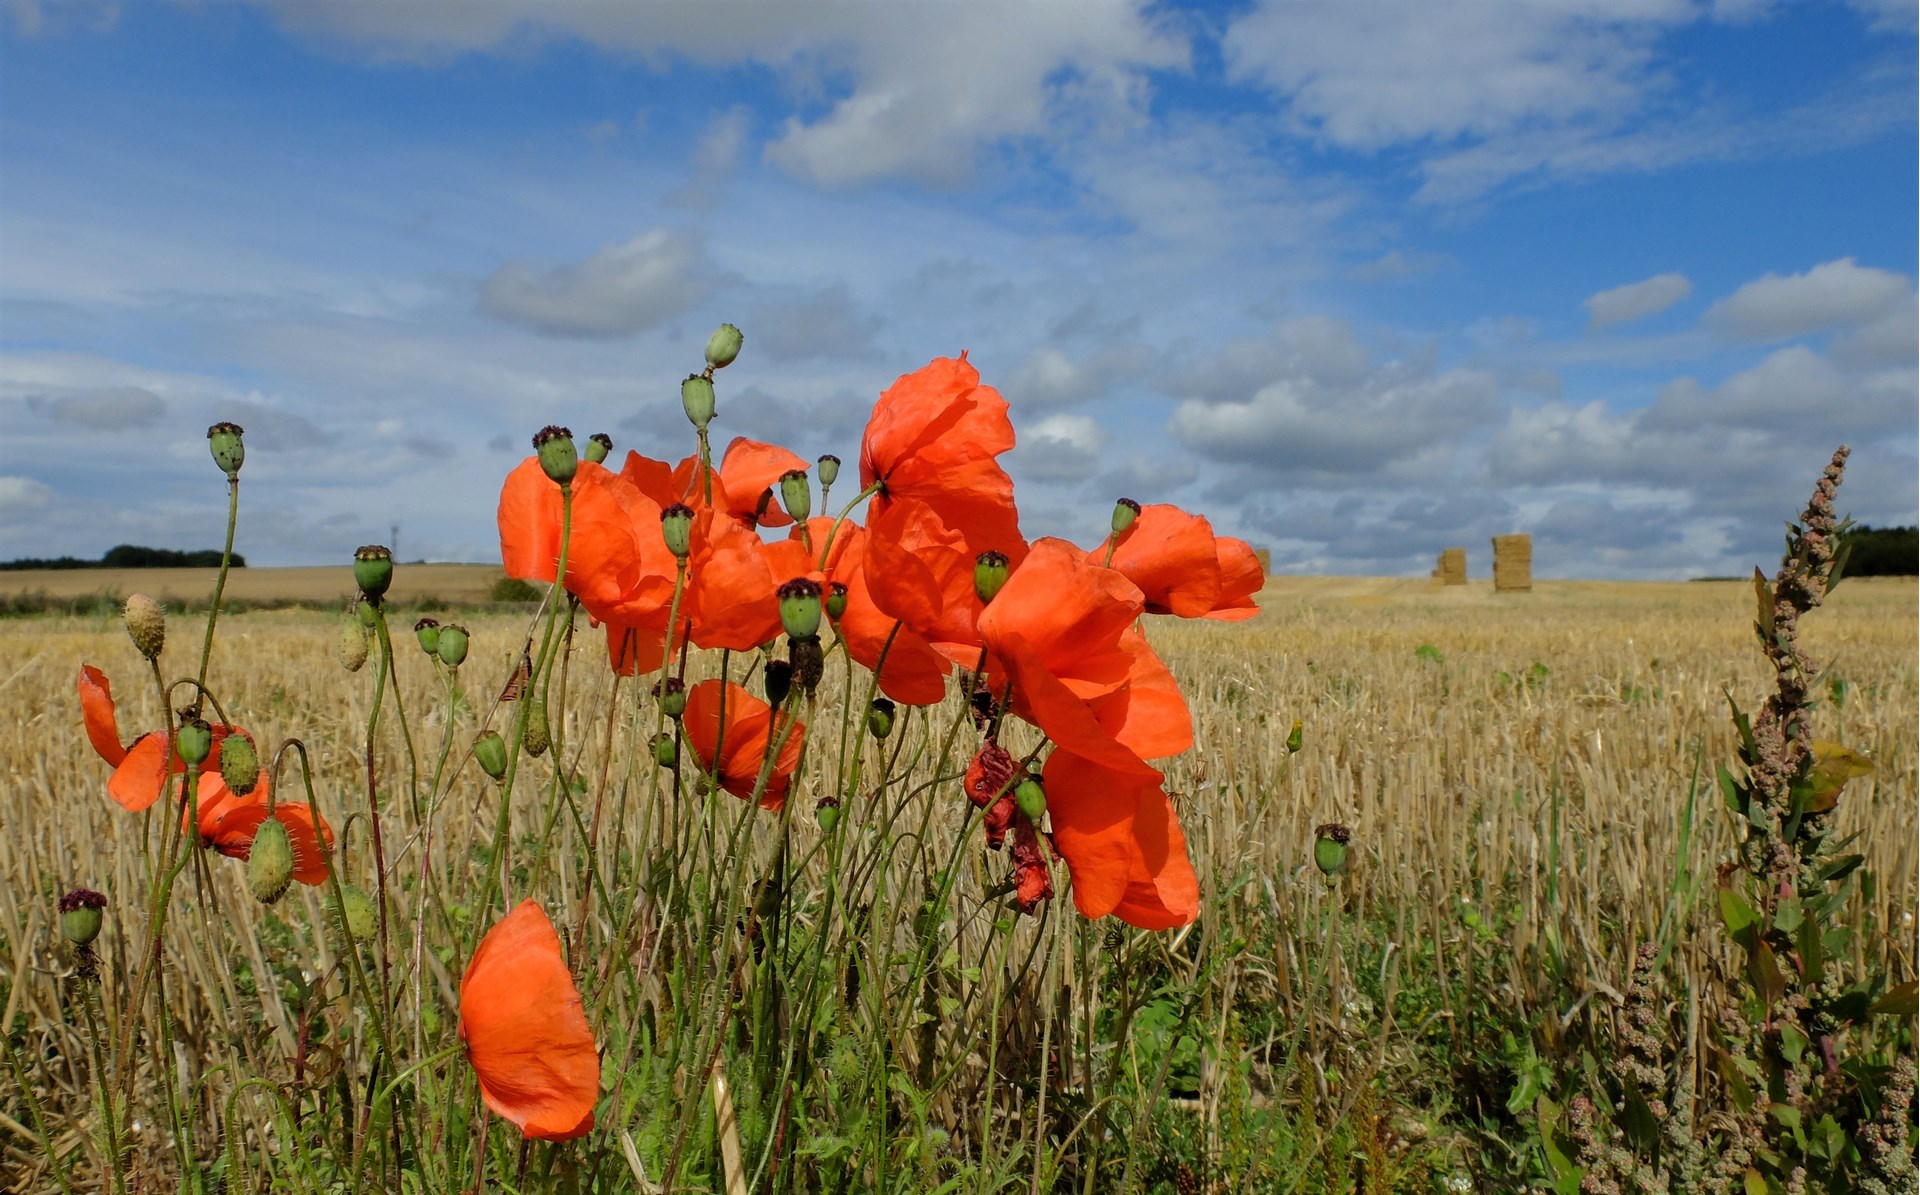 Poppies at Harvest Time